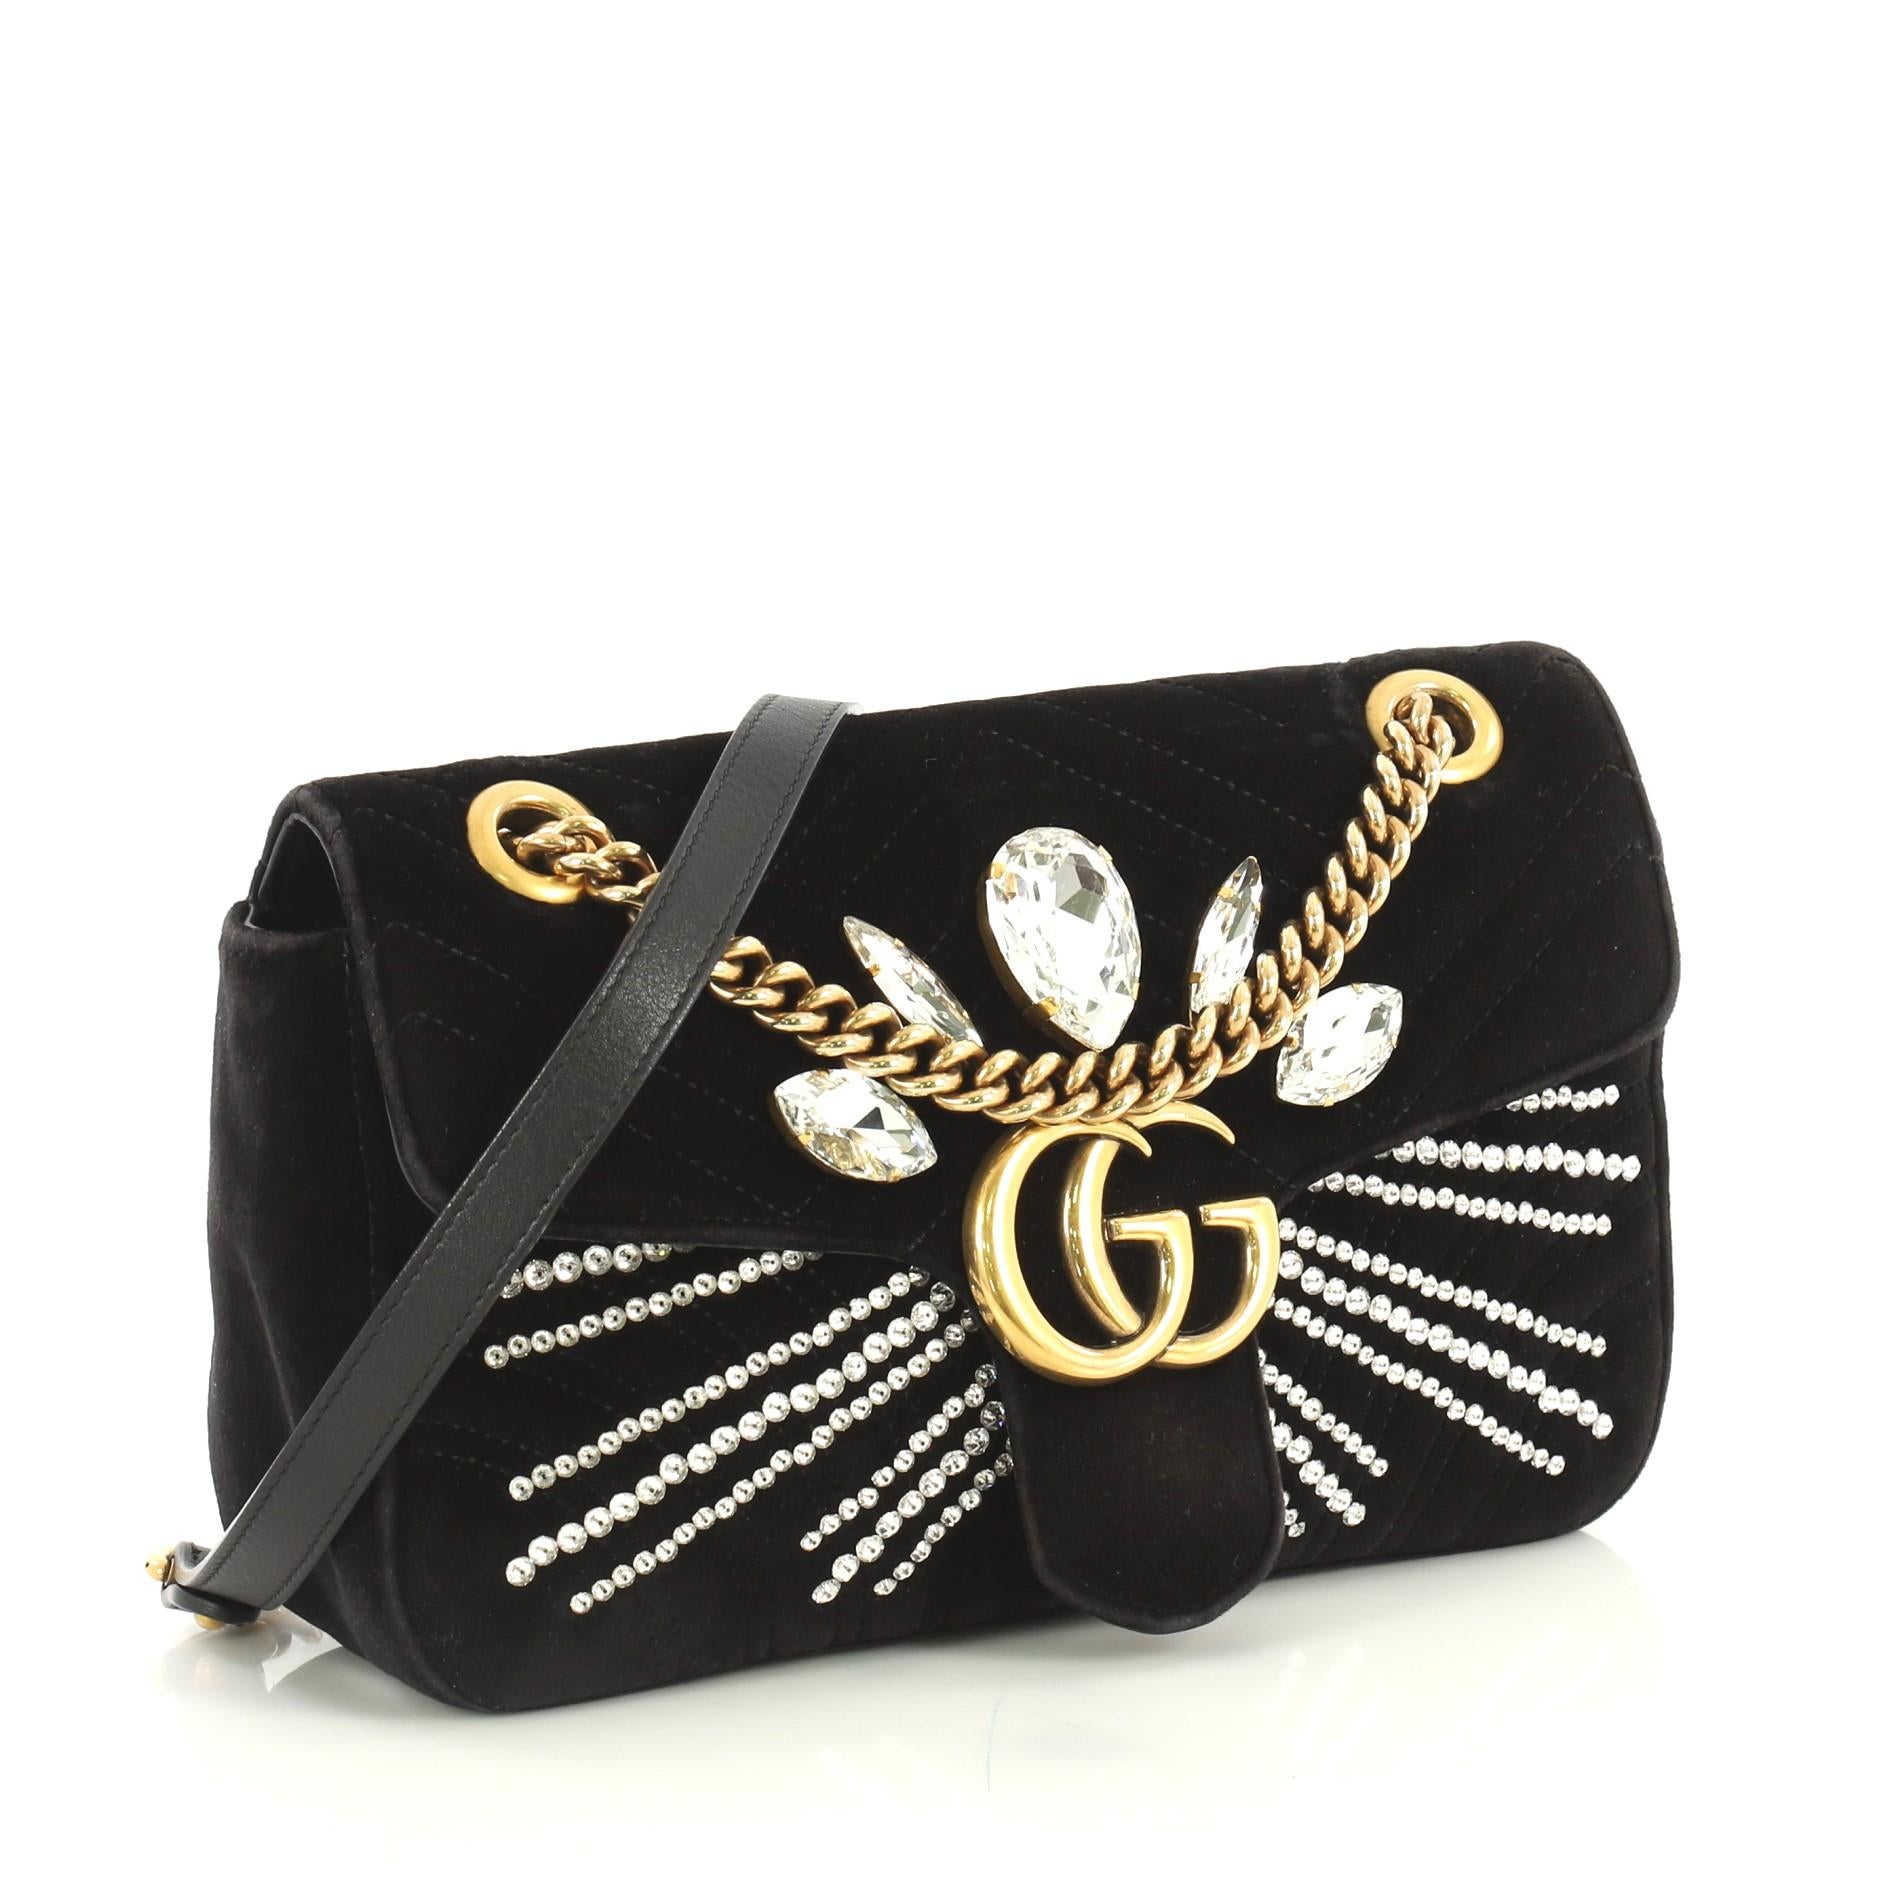 This Gucci GG Marmont Shoulder Bag Crystal Embellished Matelasse Velvet Small, crafted from black matelasse velvet, features chain link strap with leather pad, GG logo and crystal embellishments, and aged gold-tone hardware. Its push-lock closure